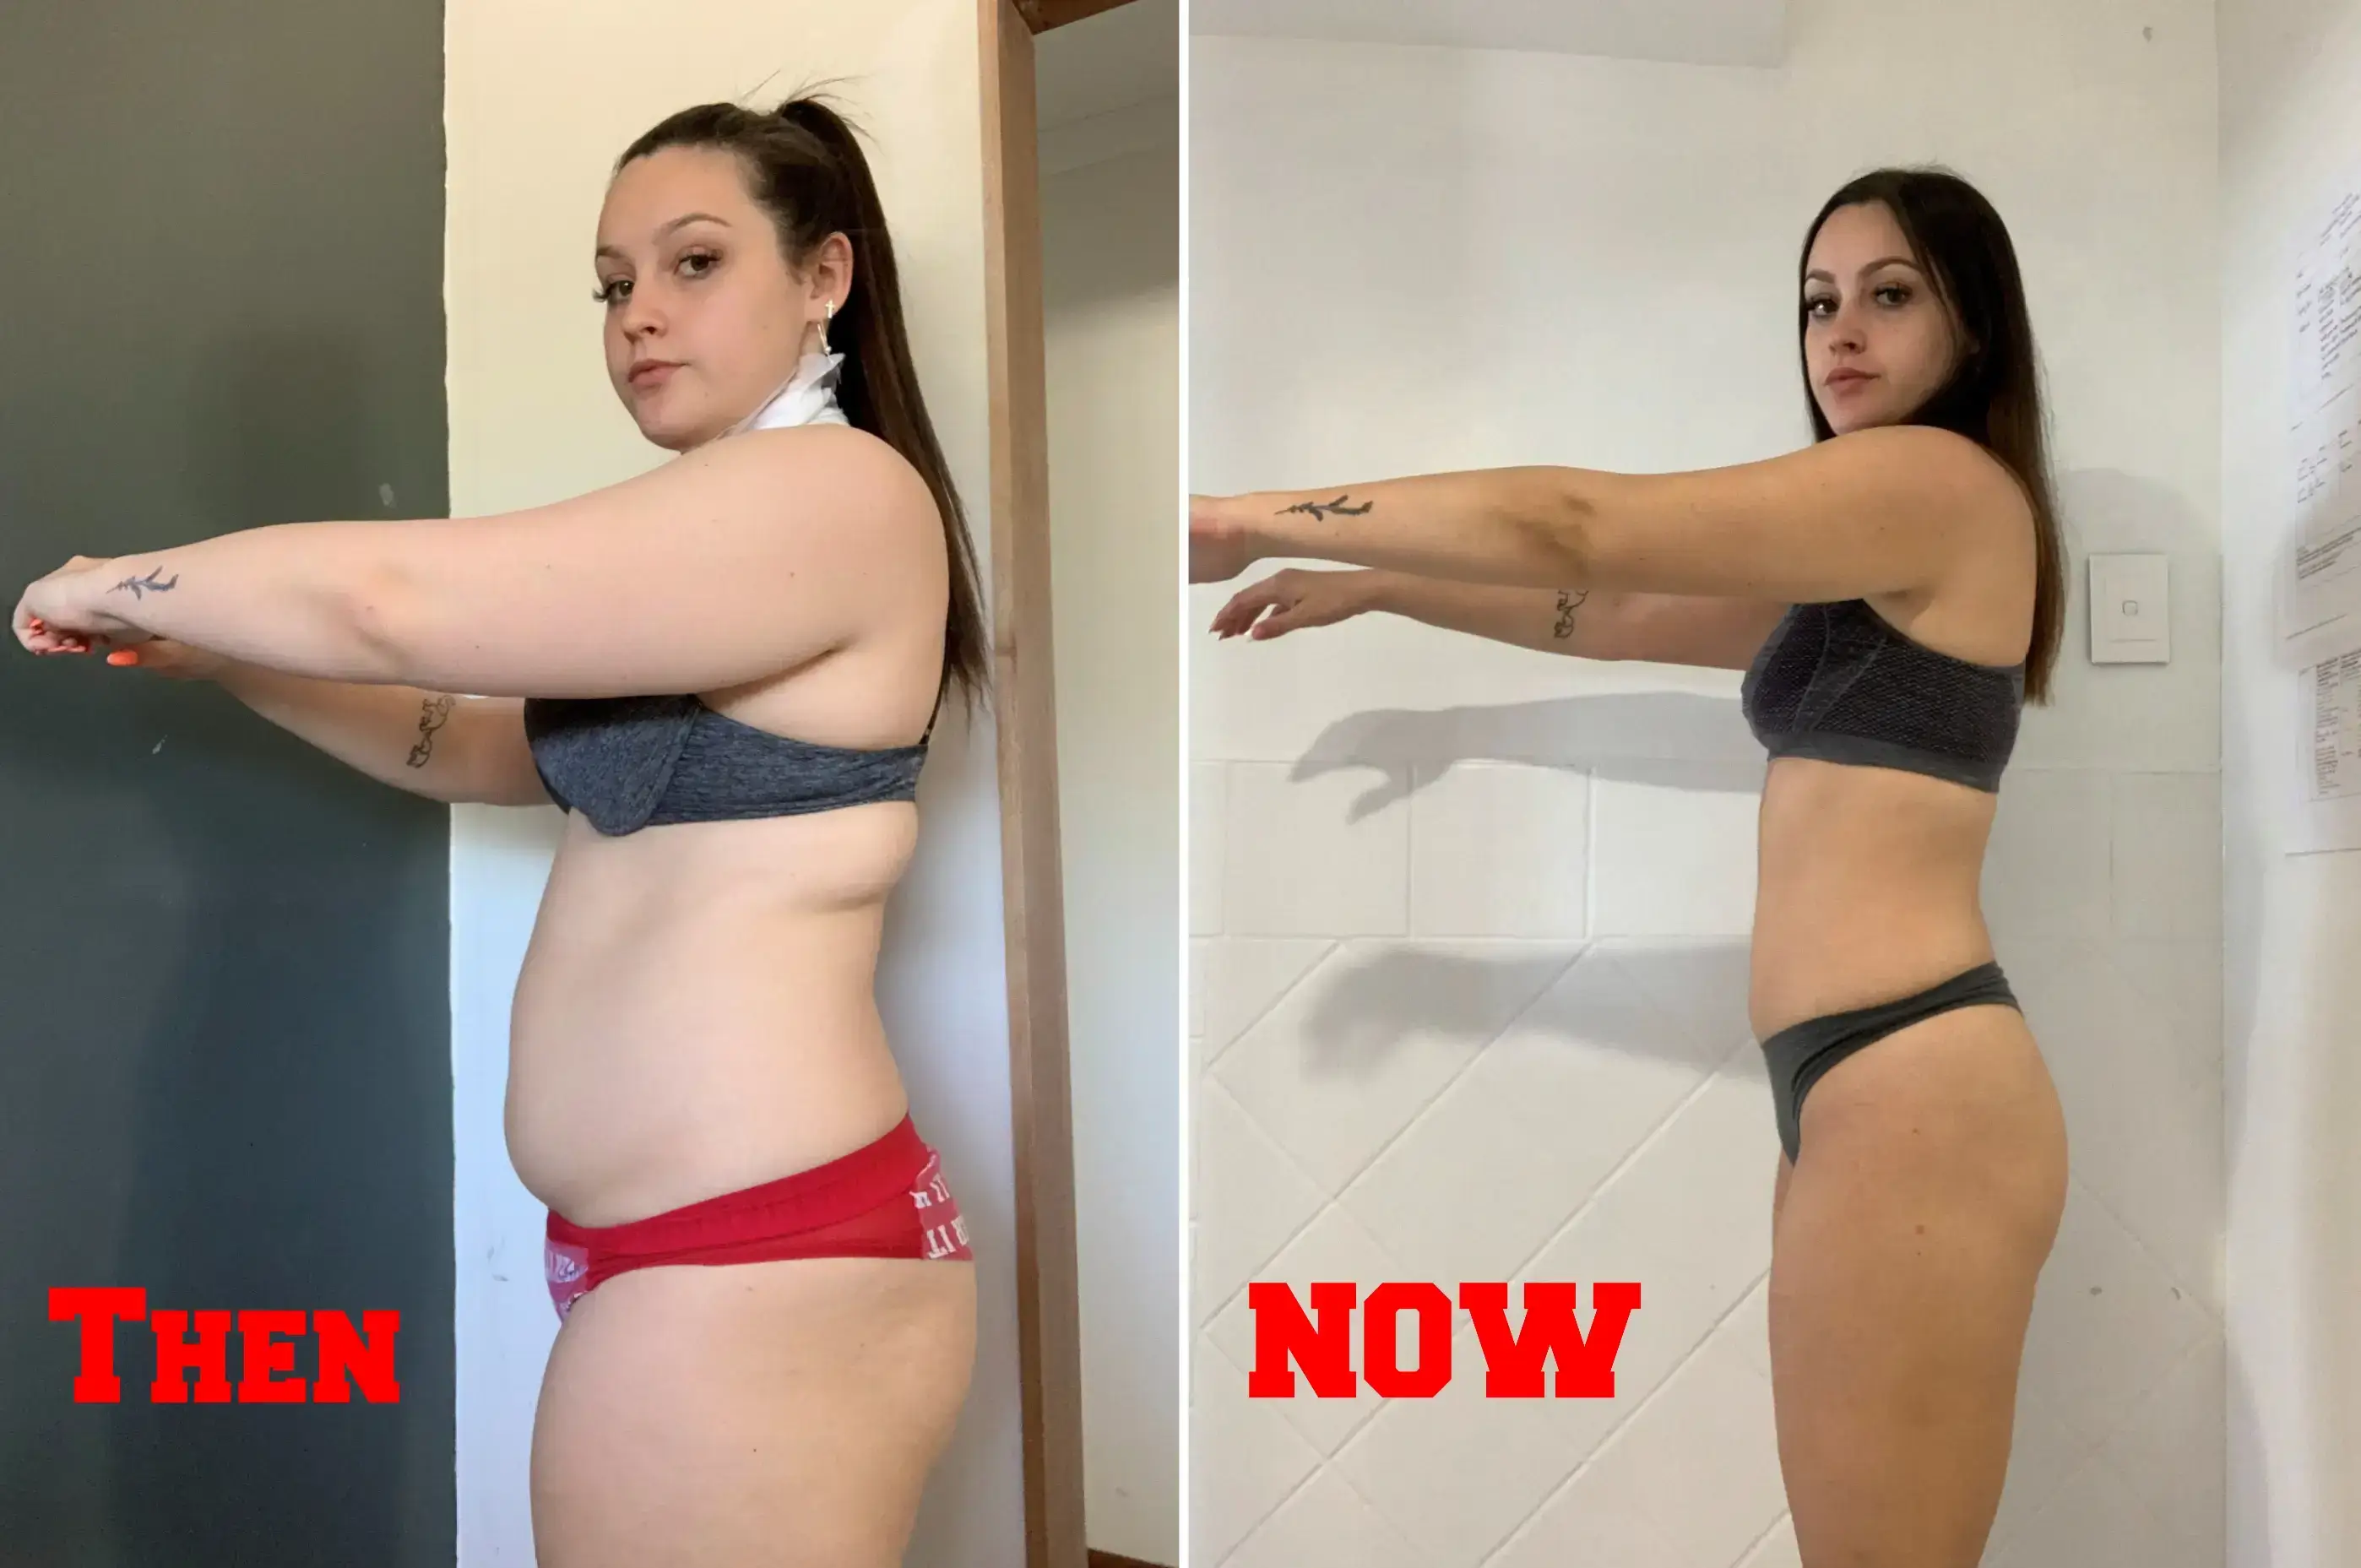 Australian girl, 23, lost 50 pounds with the help of Pilates and Easy Eating